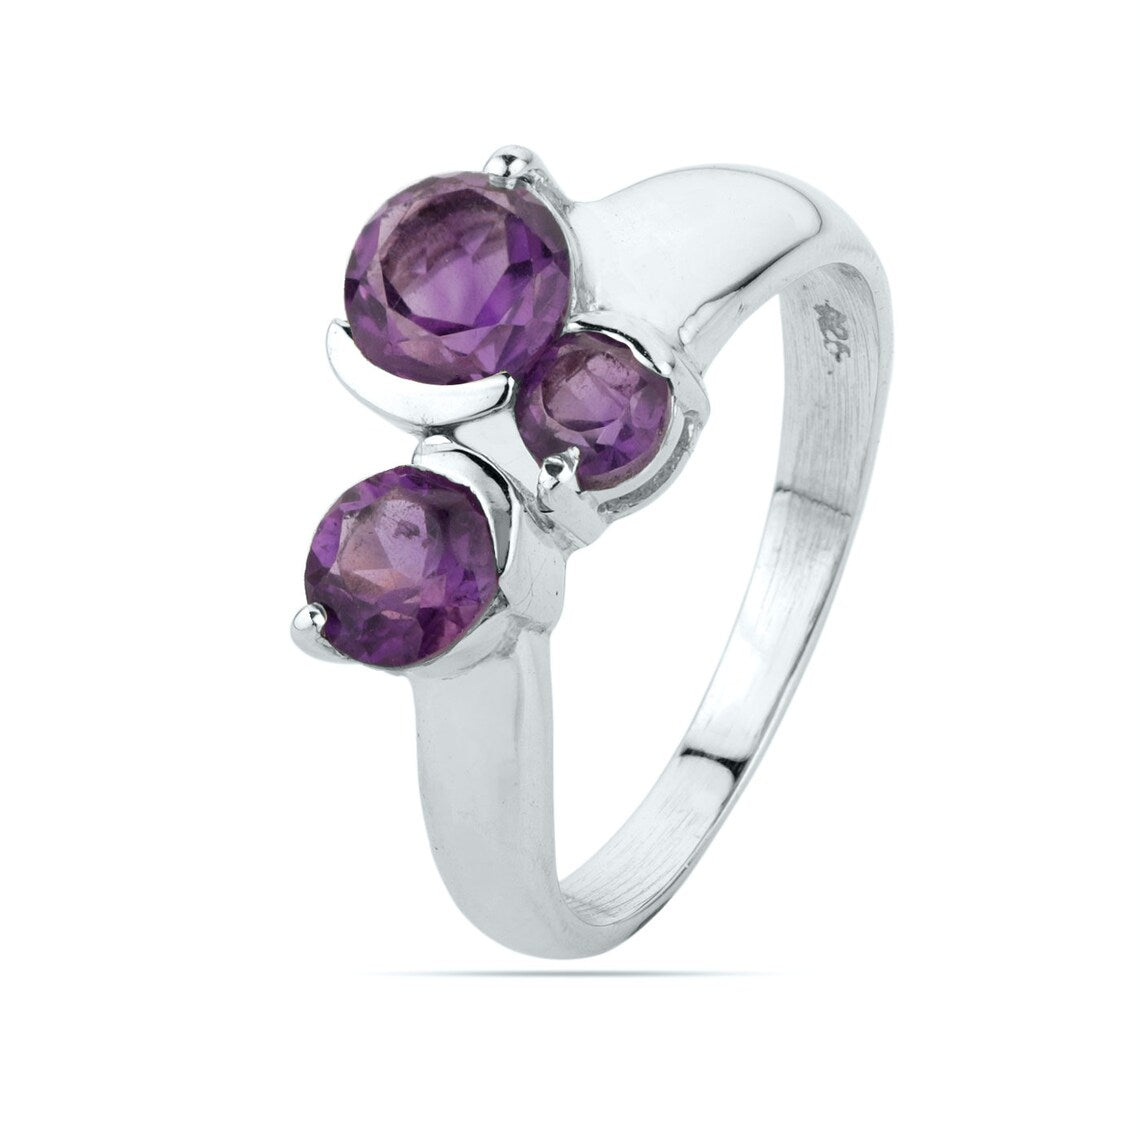 Natural Amethyst 925 Sterling Silver Ring